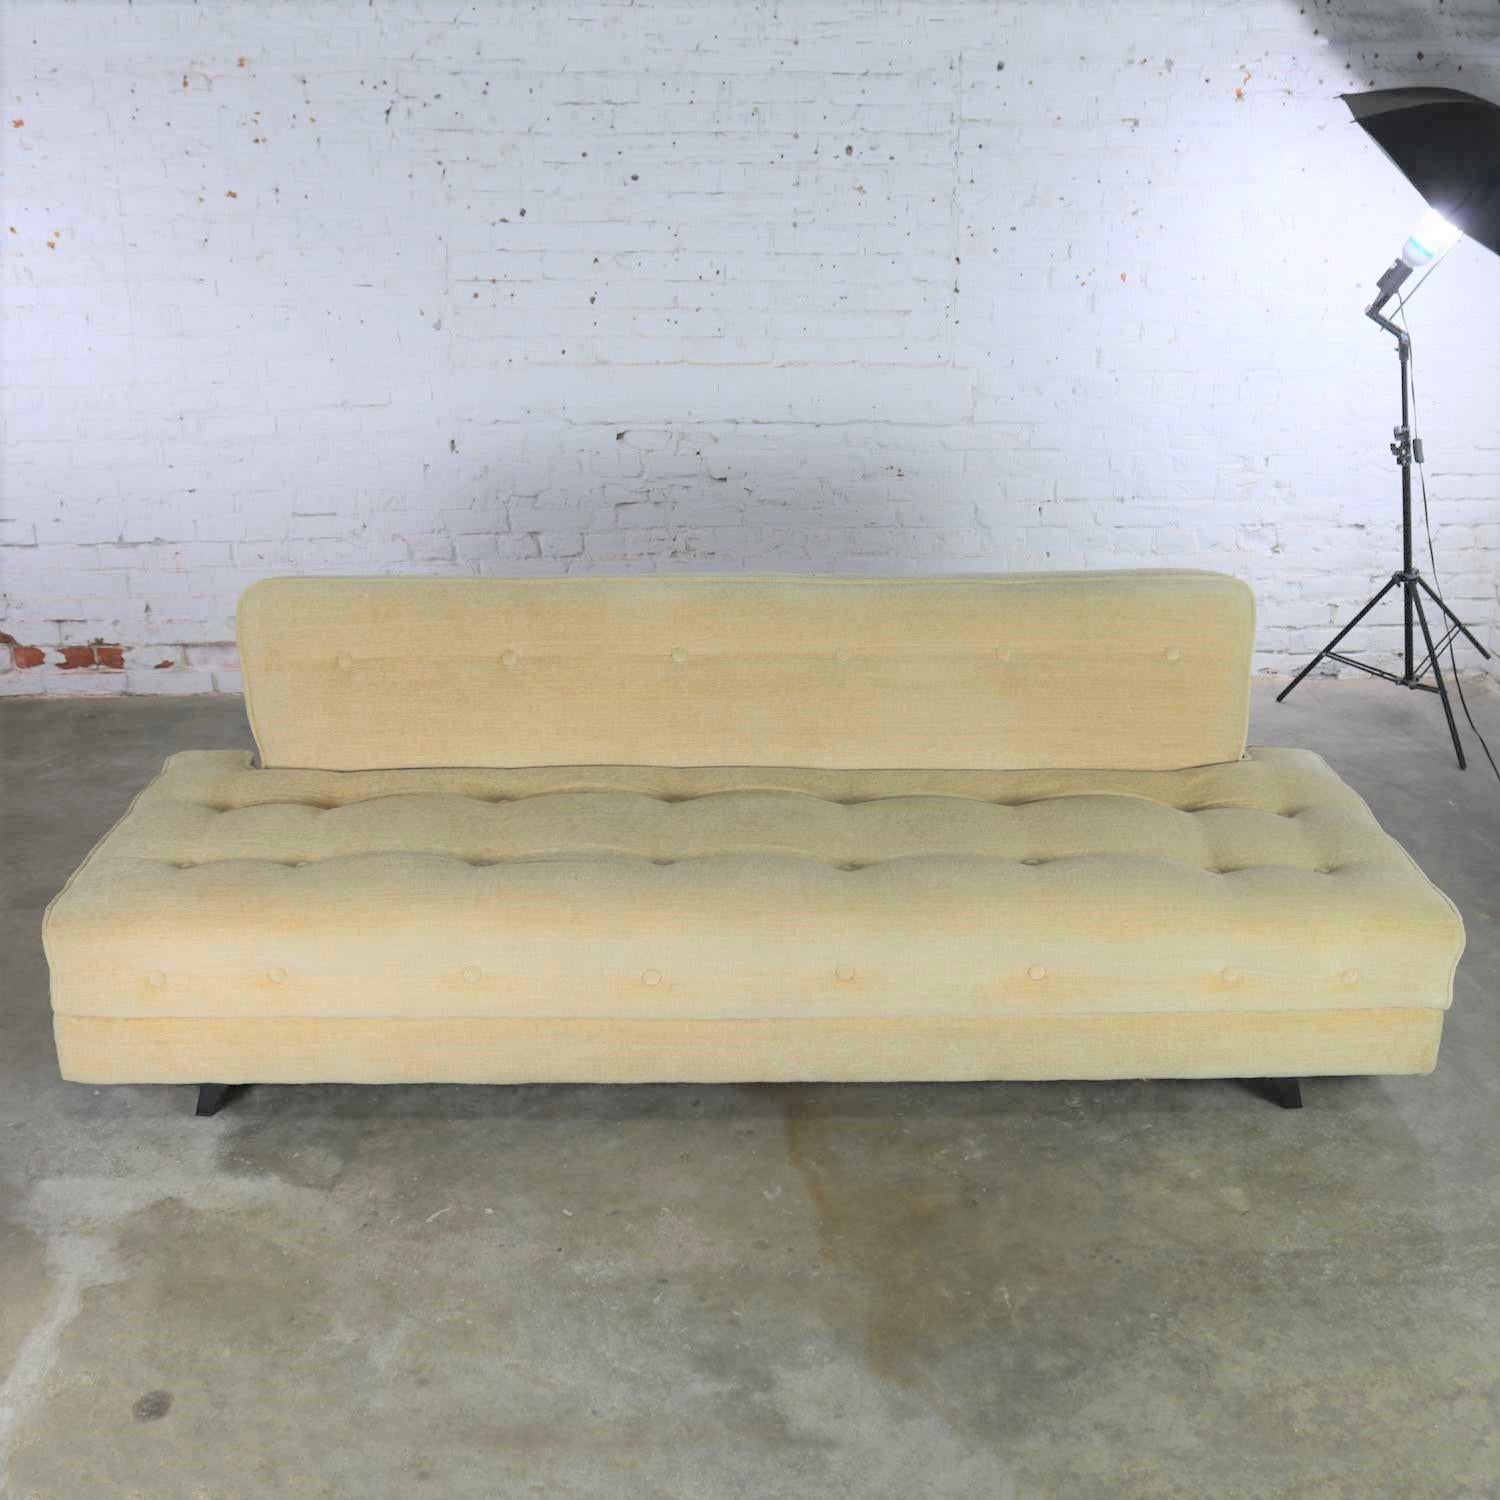 Handsome and versatile Mid-Century Modern convertible sofa bed in oatmeal colored mohair-like fabric with button detail. There is storage in the bottom for bedding. It is in wonderful vintage condition, we think it was reupholstered at some point